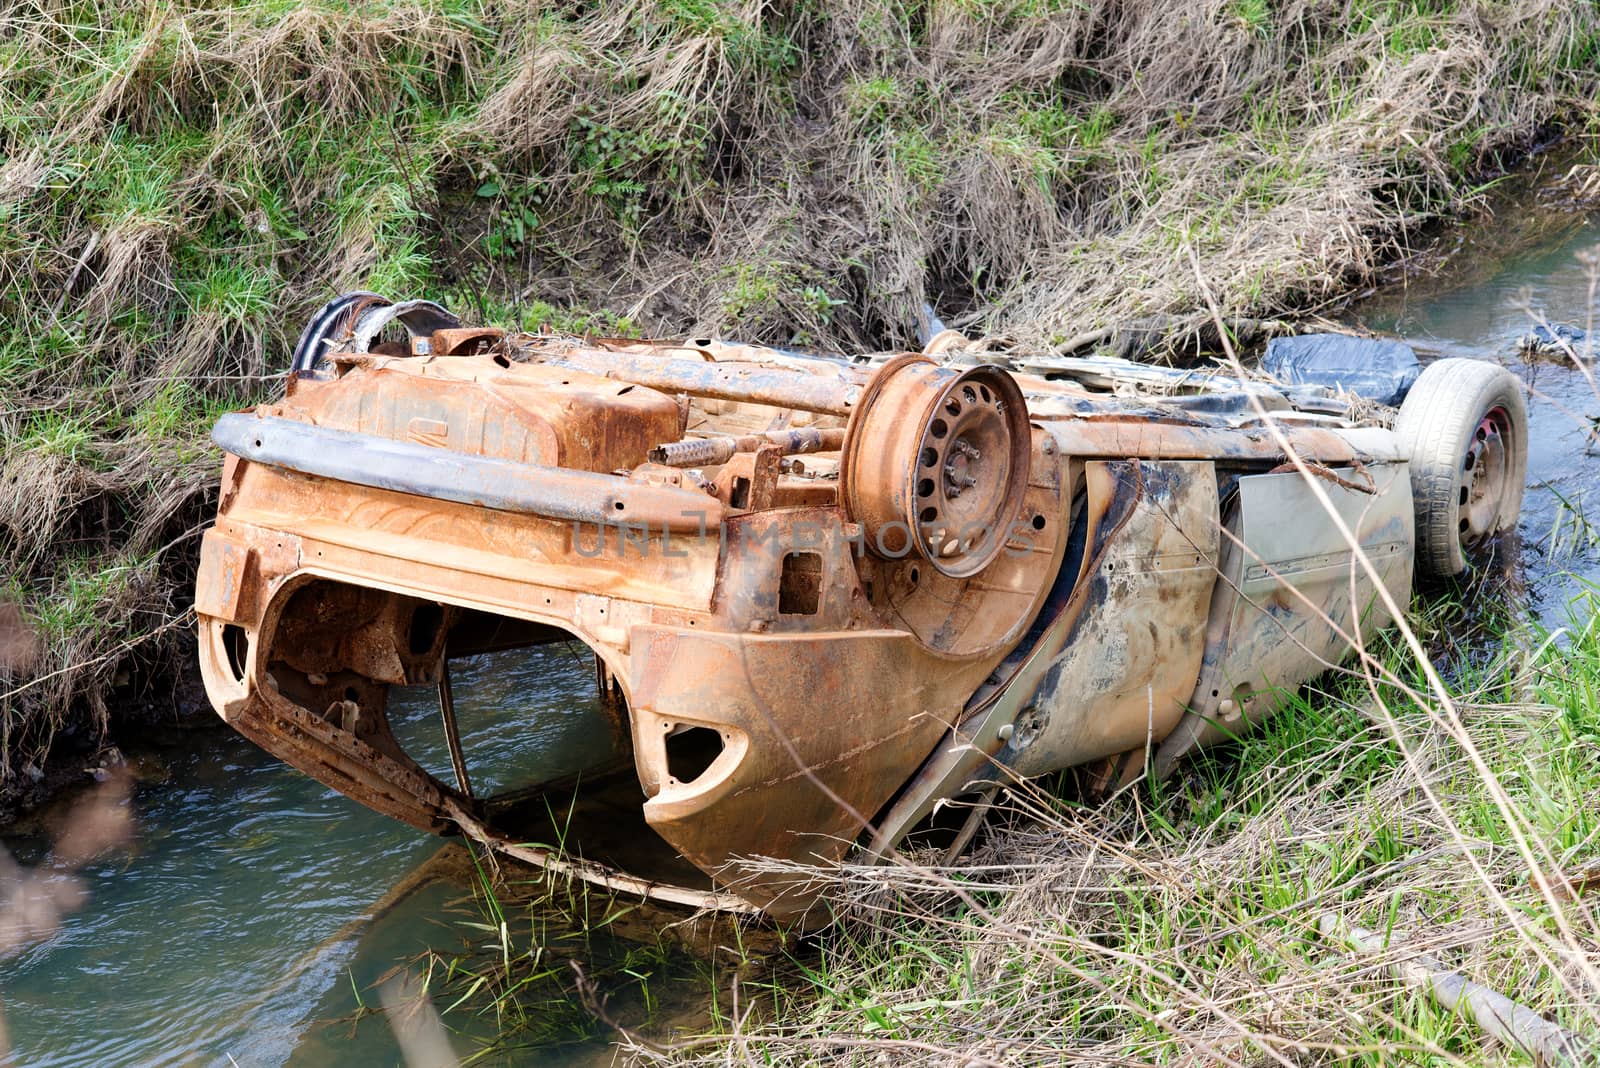 Stolen burnt rusty car abandoned in a river in a countriside polluting the environment